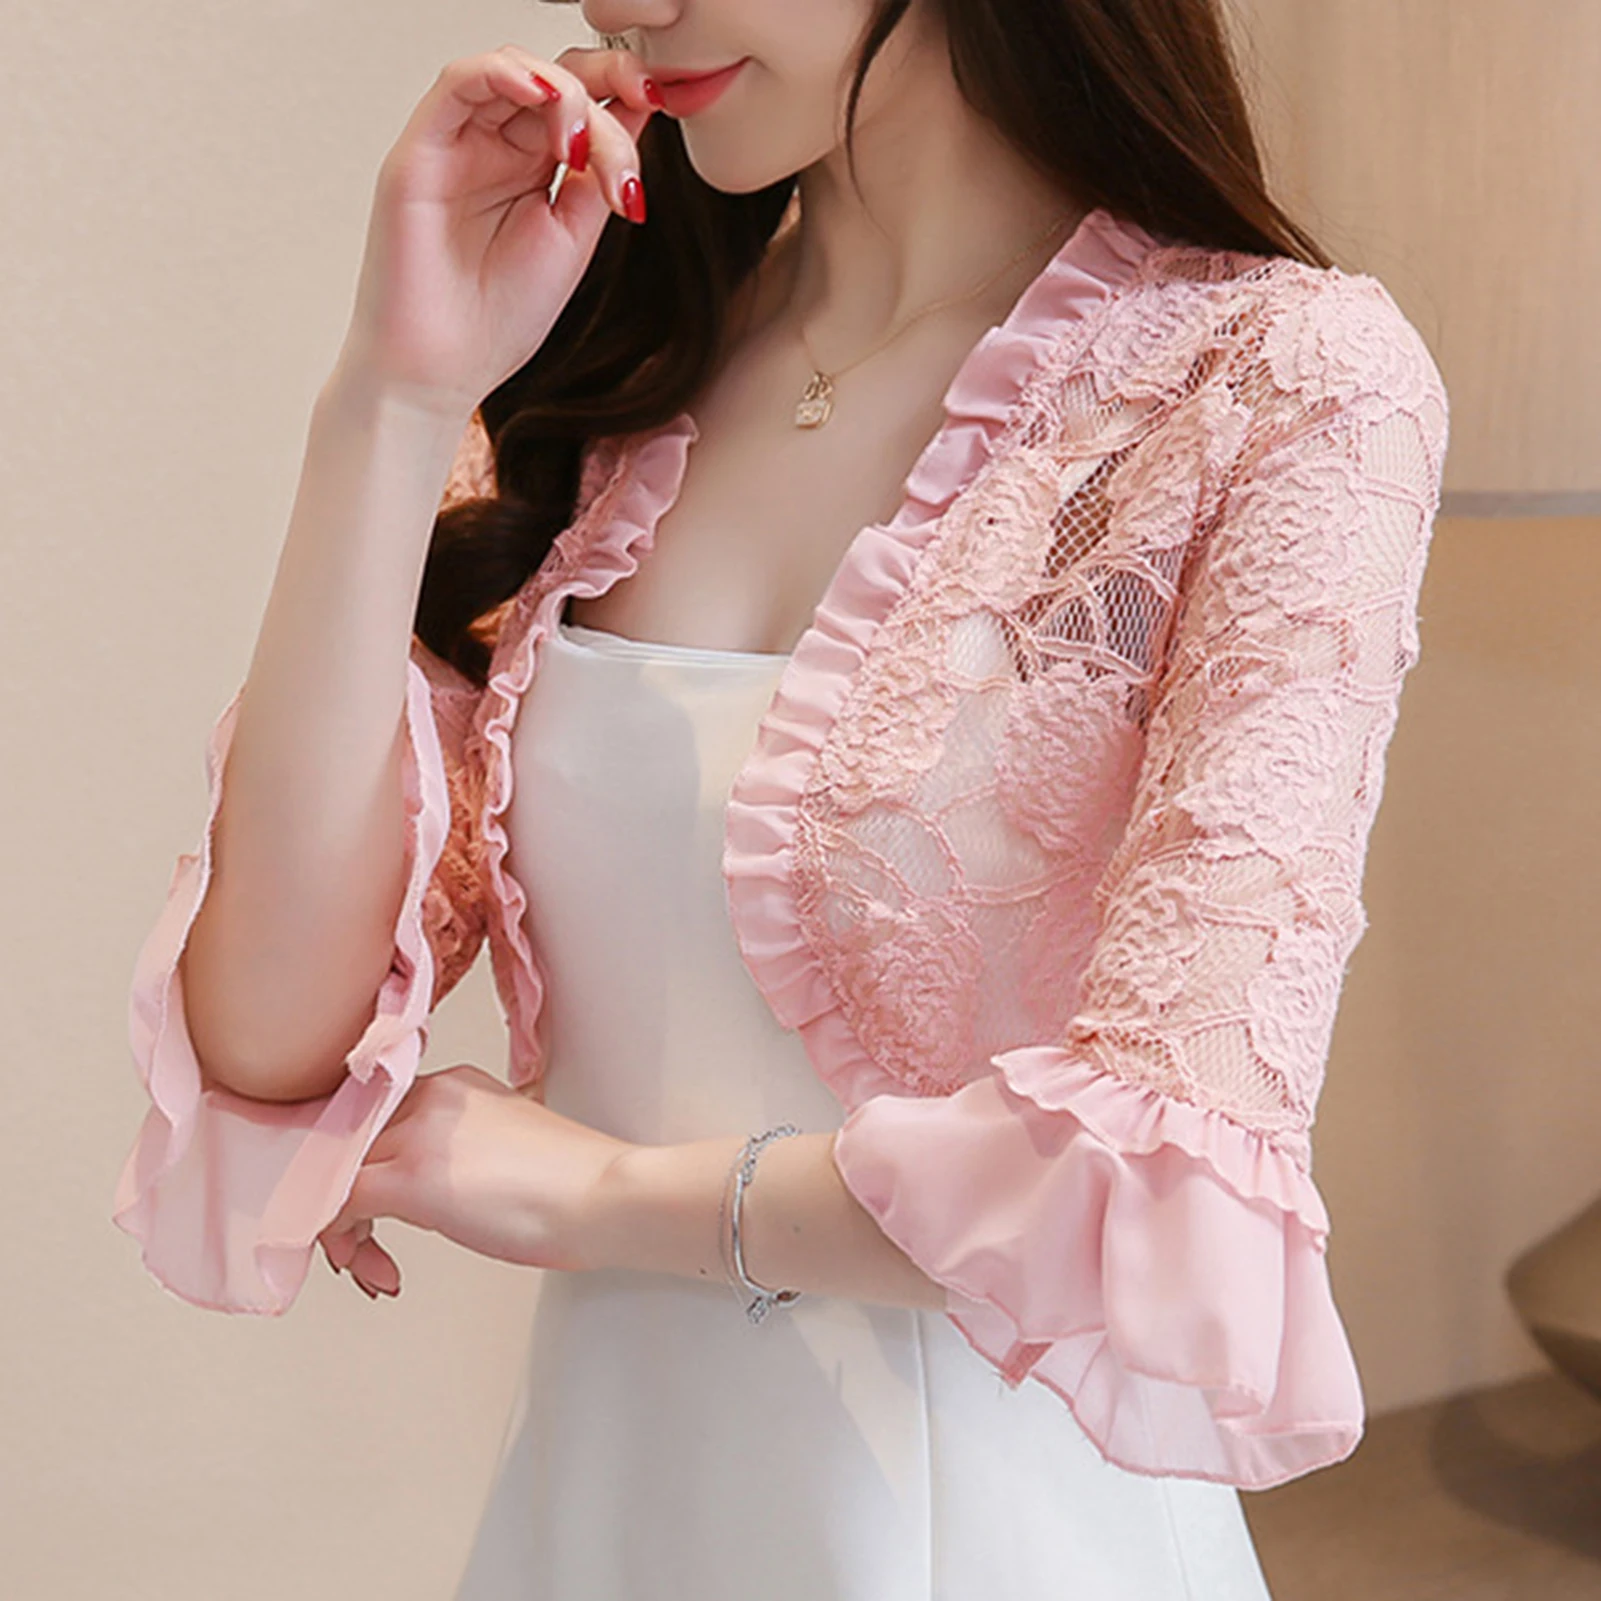 

Newly Women's Round Collar Shawl with Plain Floral Lace as Gifts for Girls m99